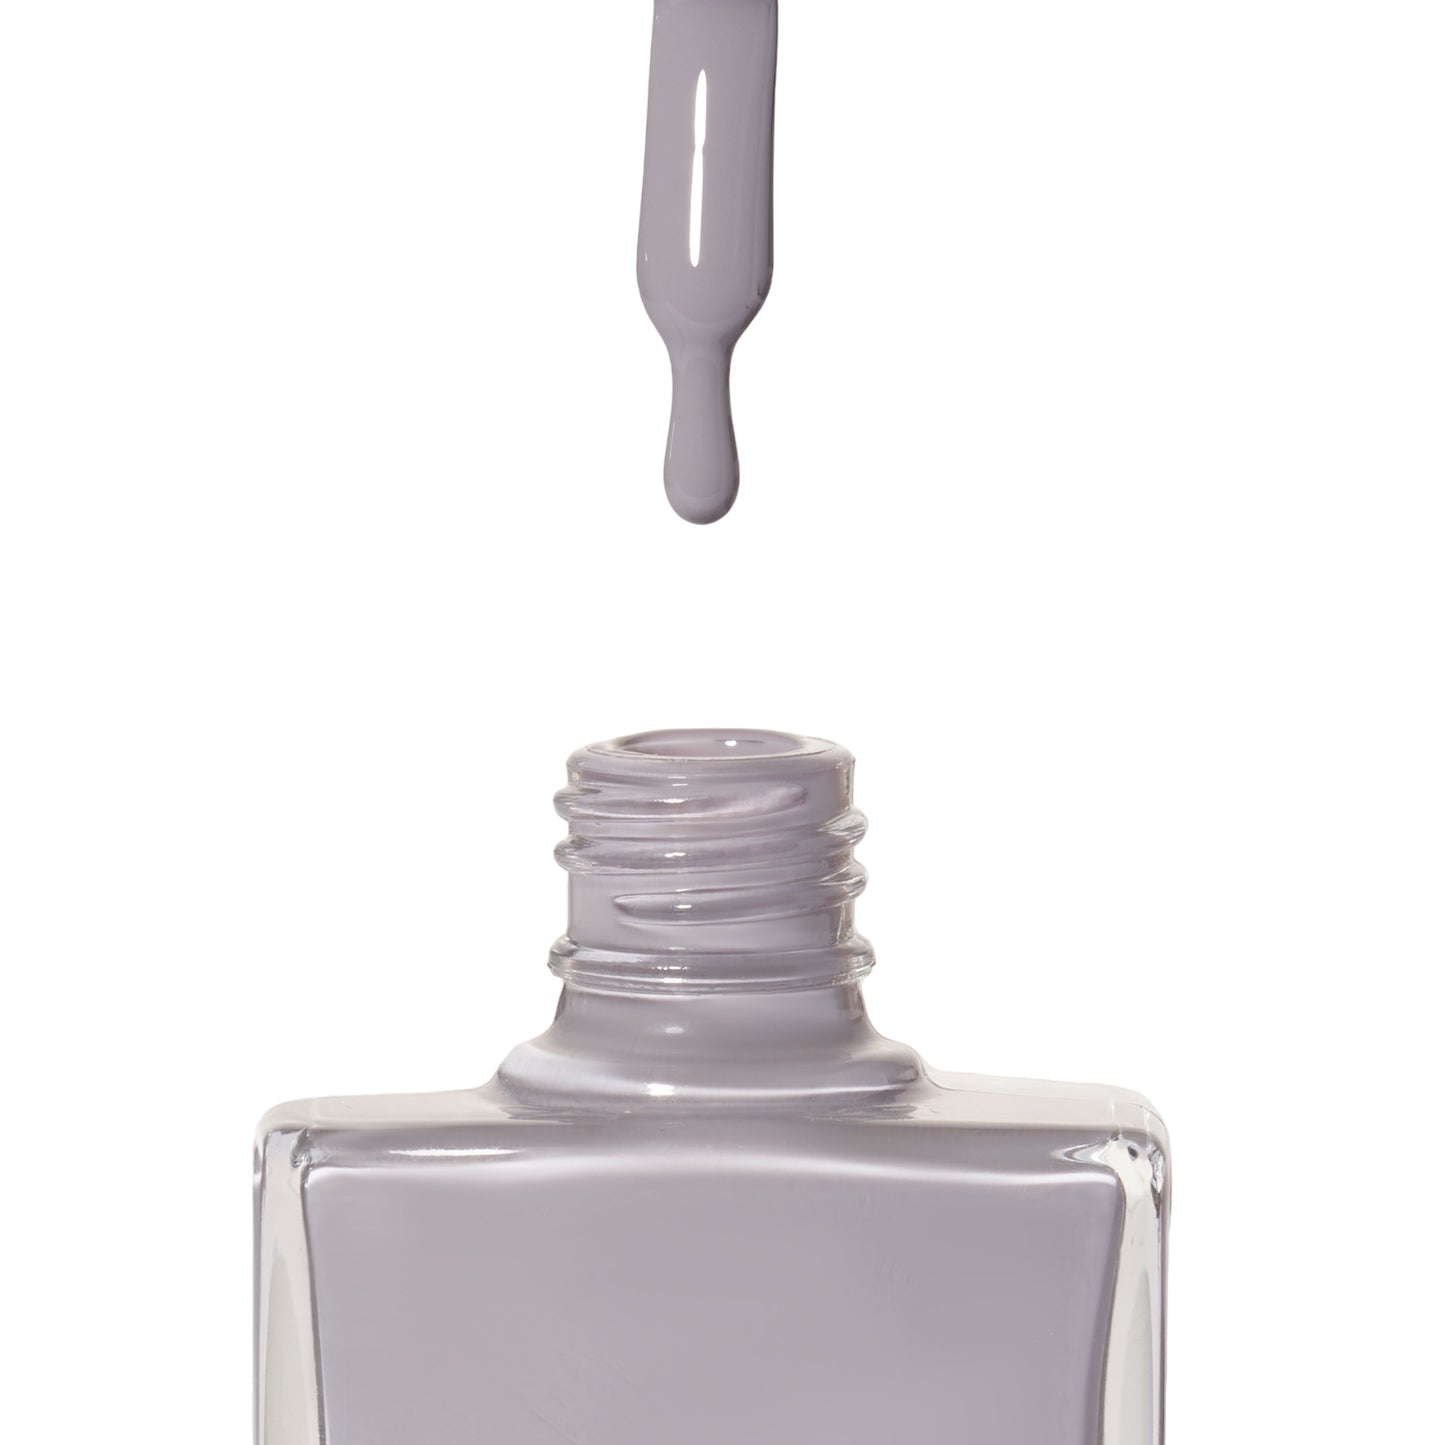 A bottle of Wisdom, a pale grey shade  from True Nail Polish